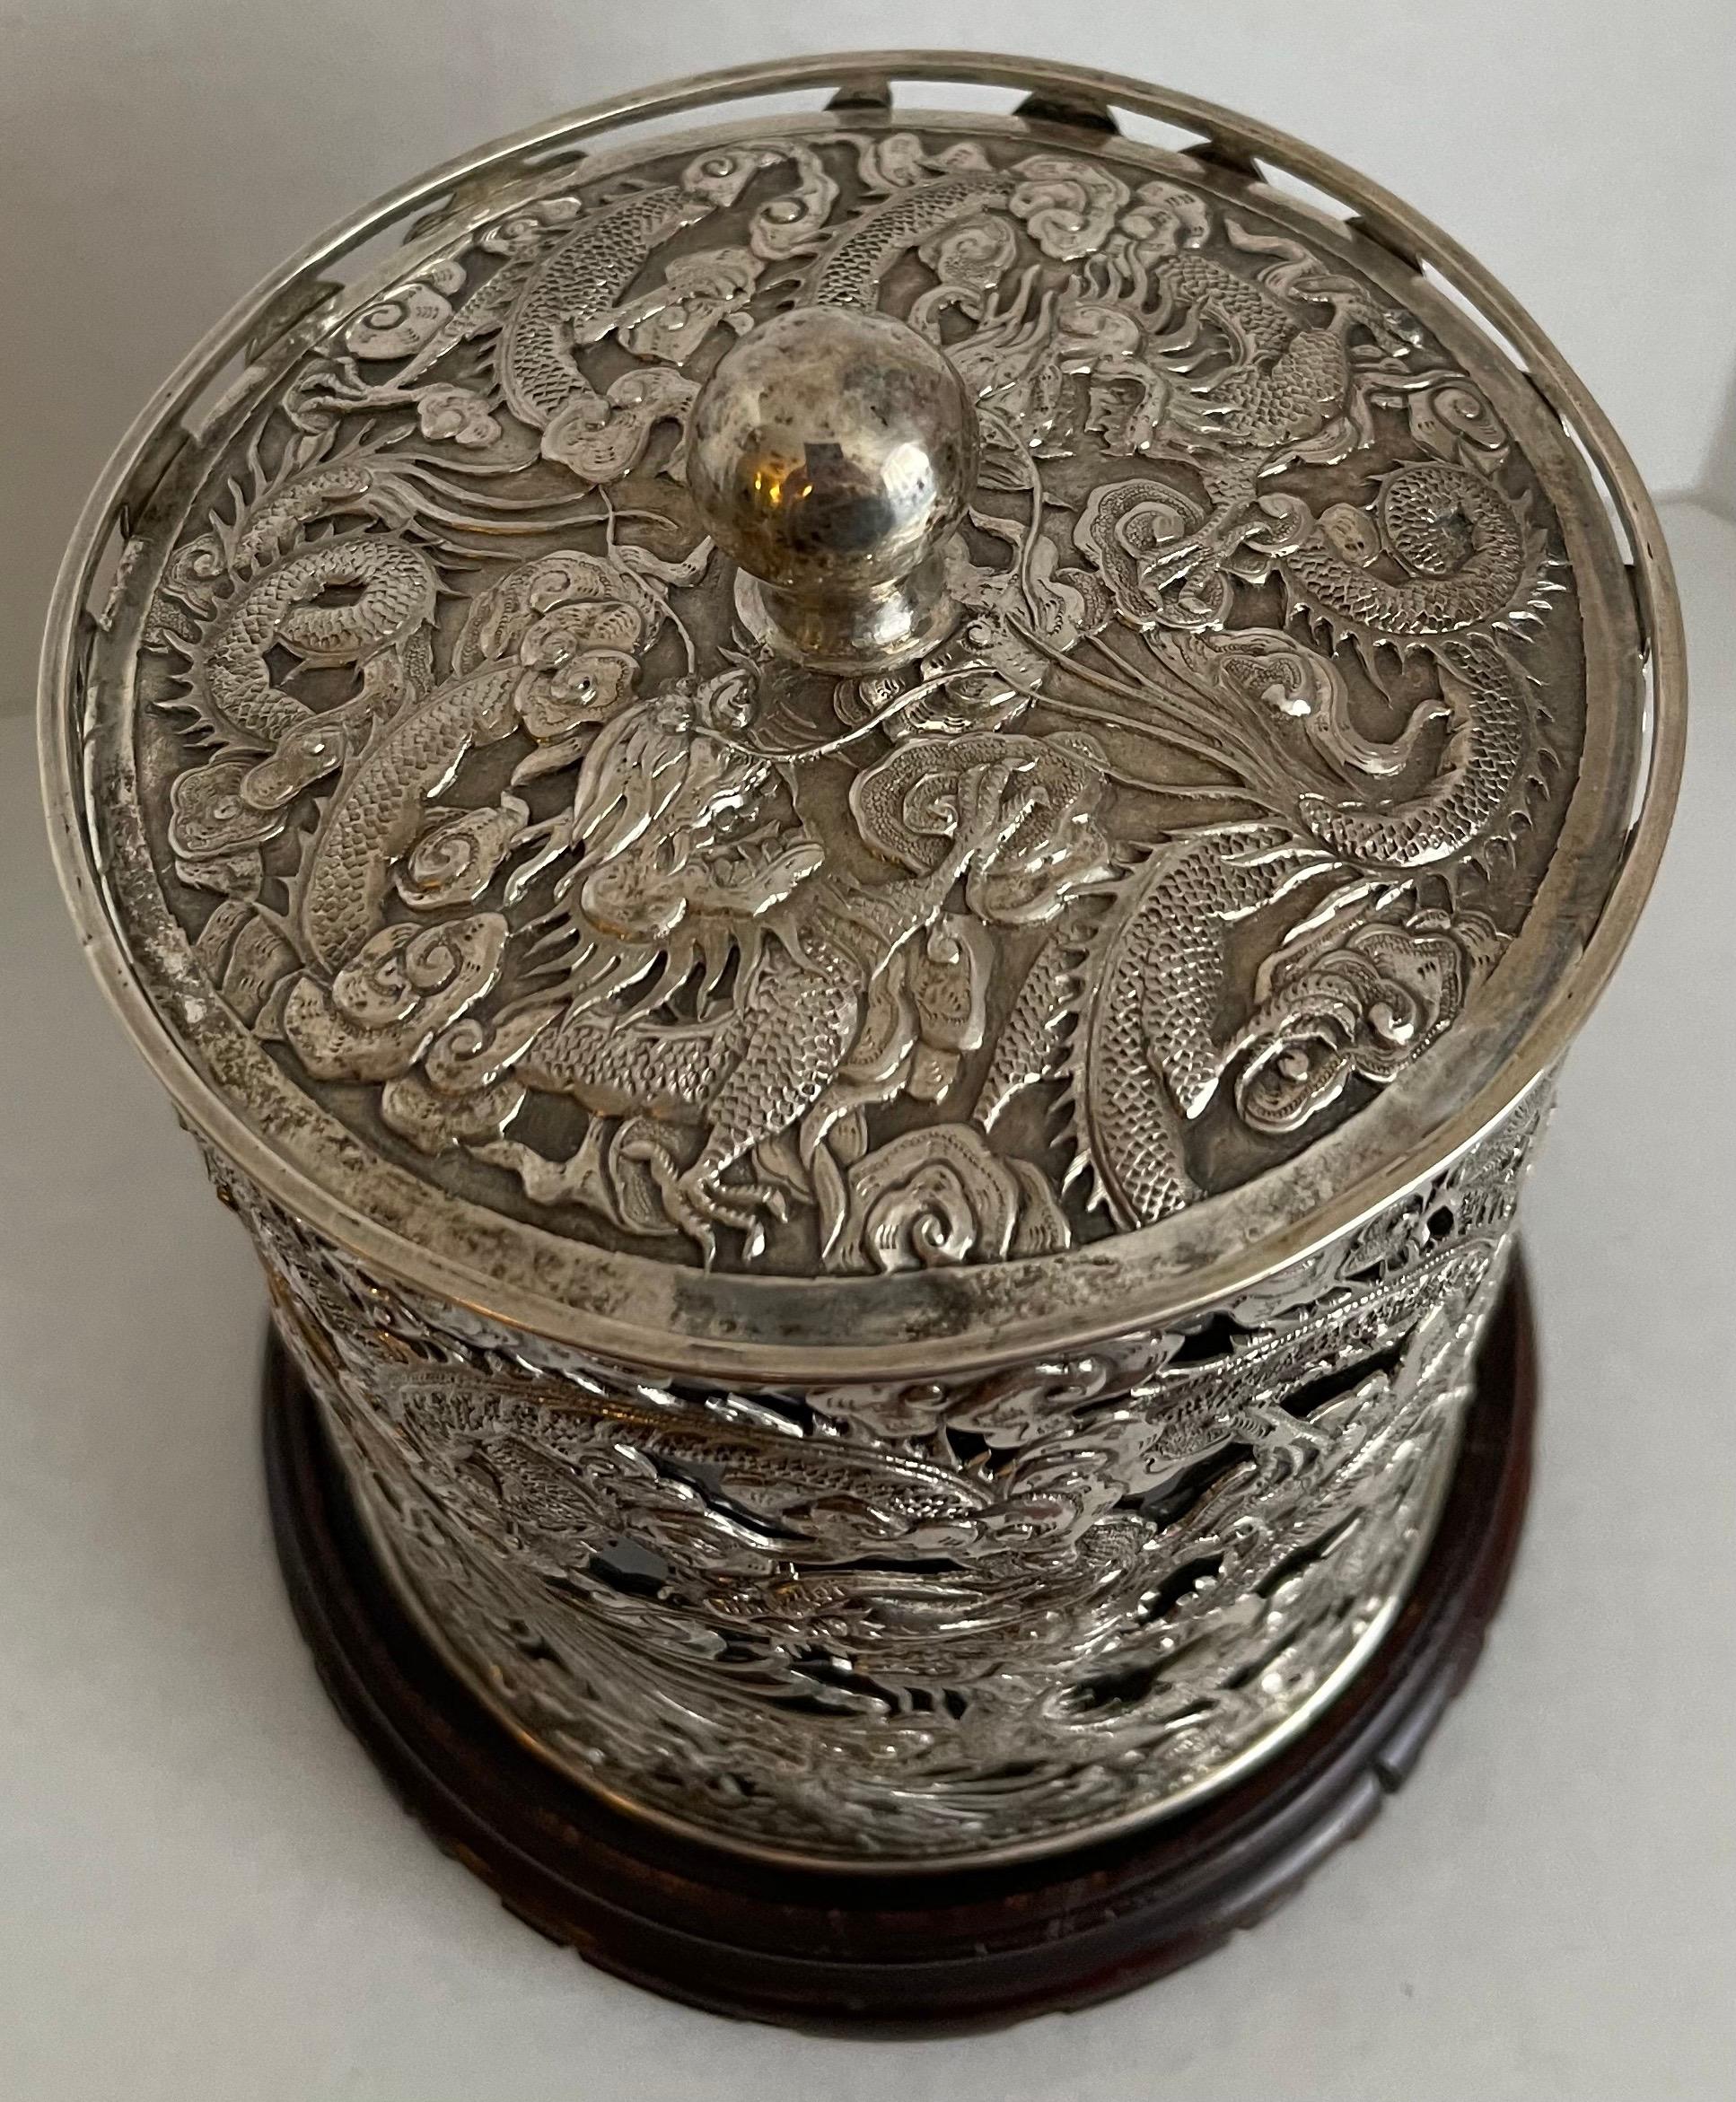 Chinese Export Silver Humidor on Stand 1